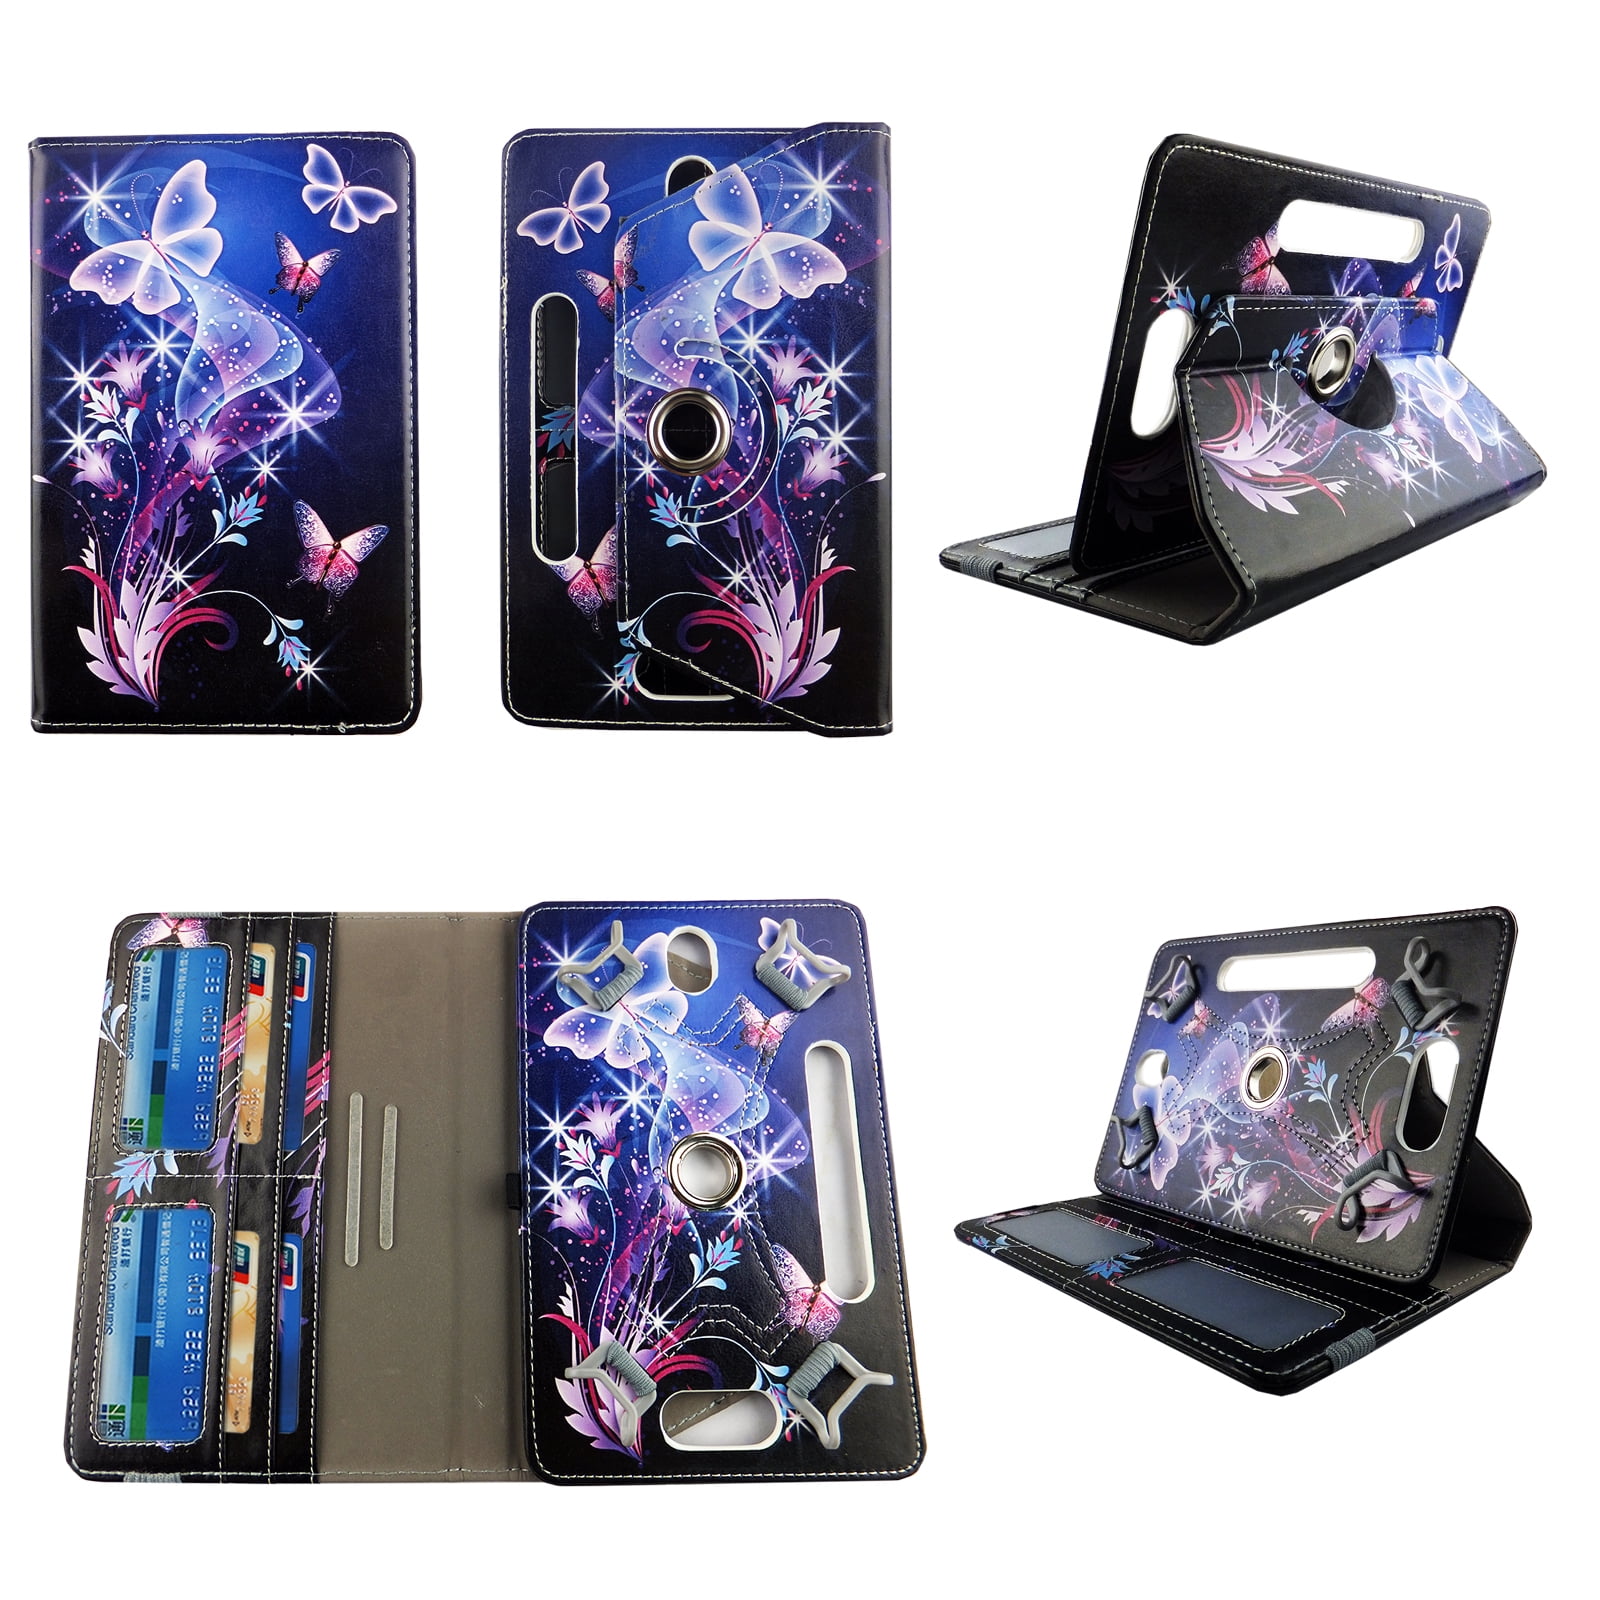 Galaxy Style Butterfly tablet case 10 inch for Huawei Media Pad Link 10" 10inch android tablet cases 360 rotating slim folio stand protector pu leather travel e-reader cash slots - Walmart.com